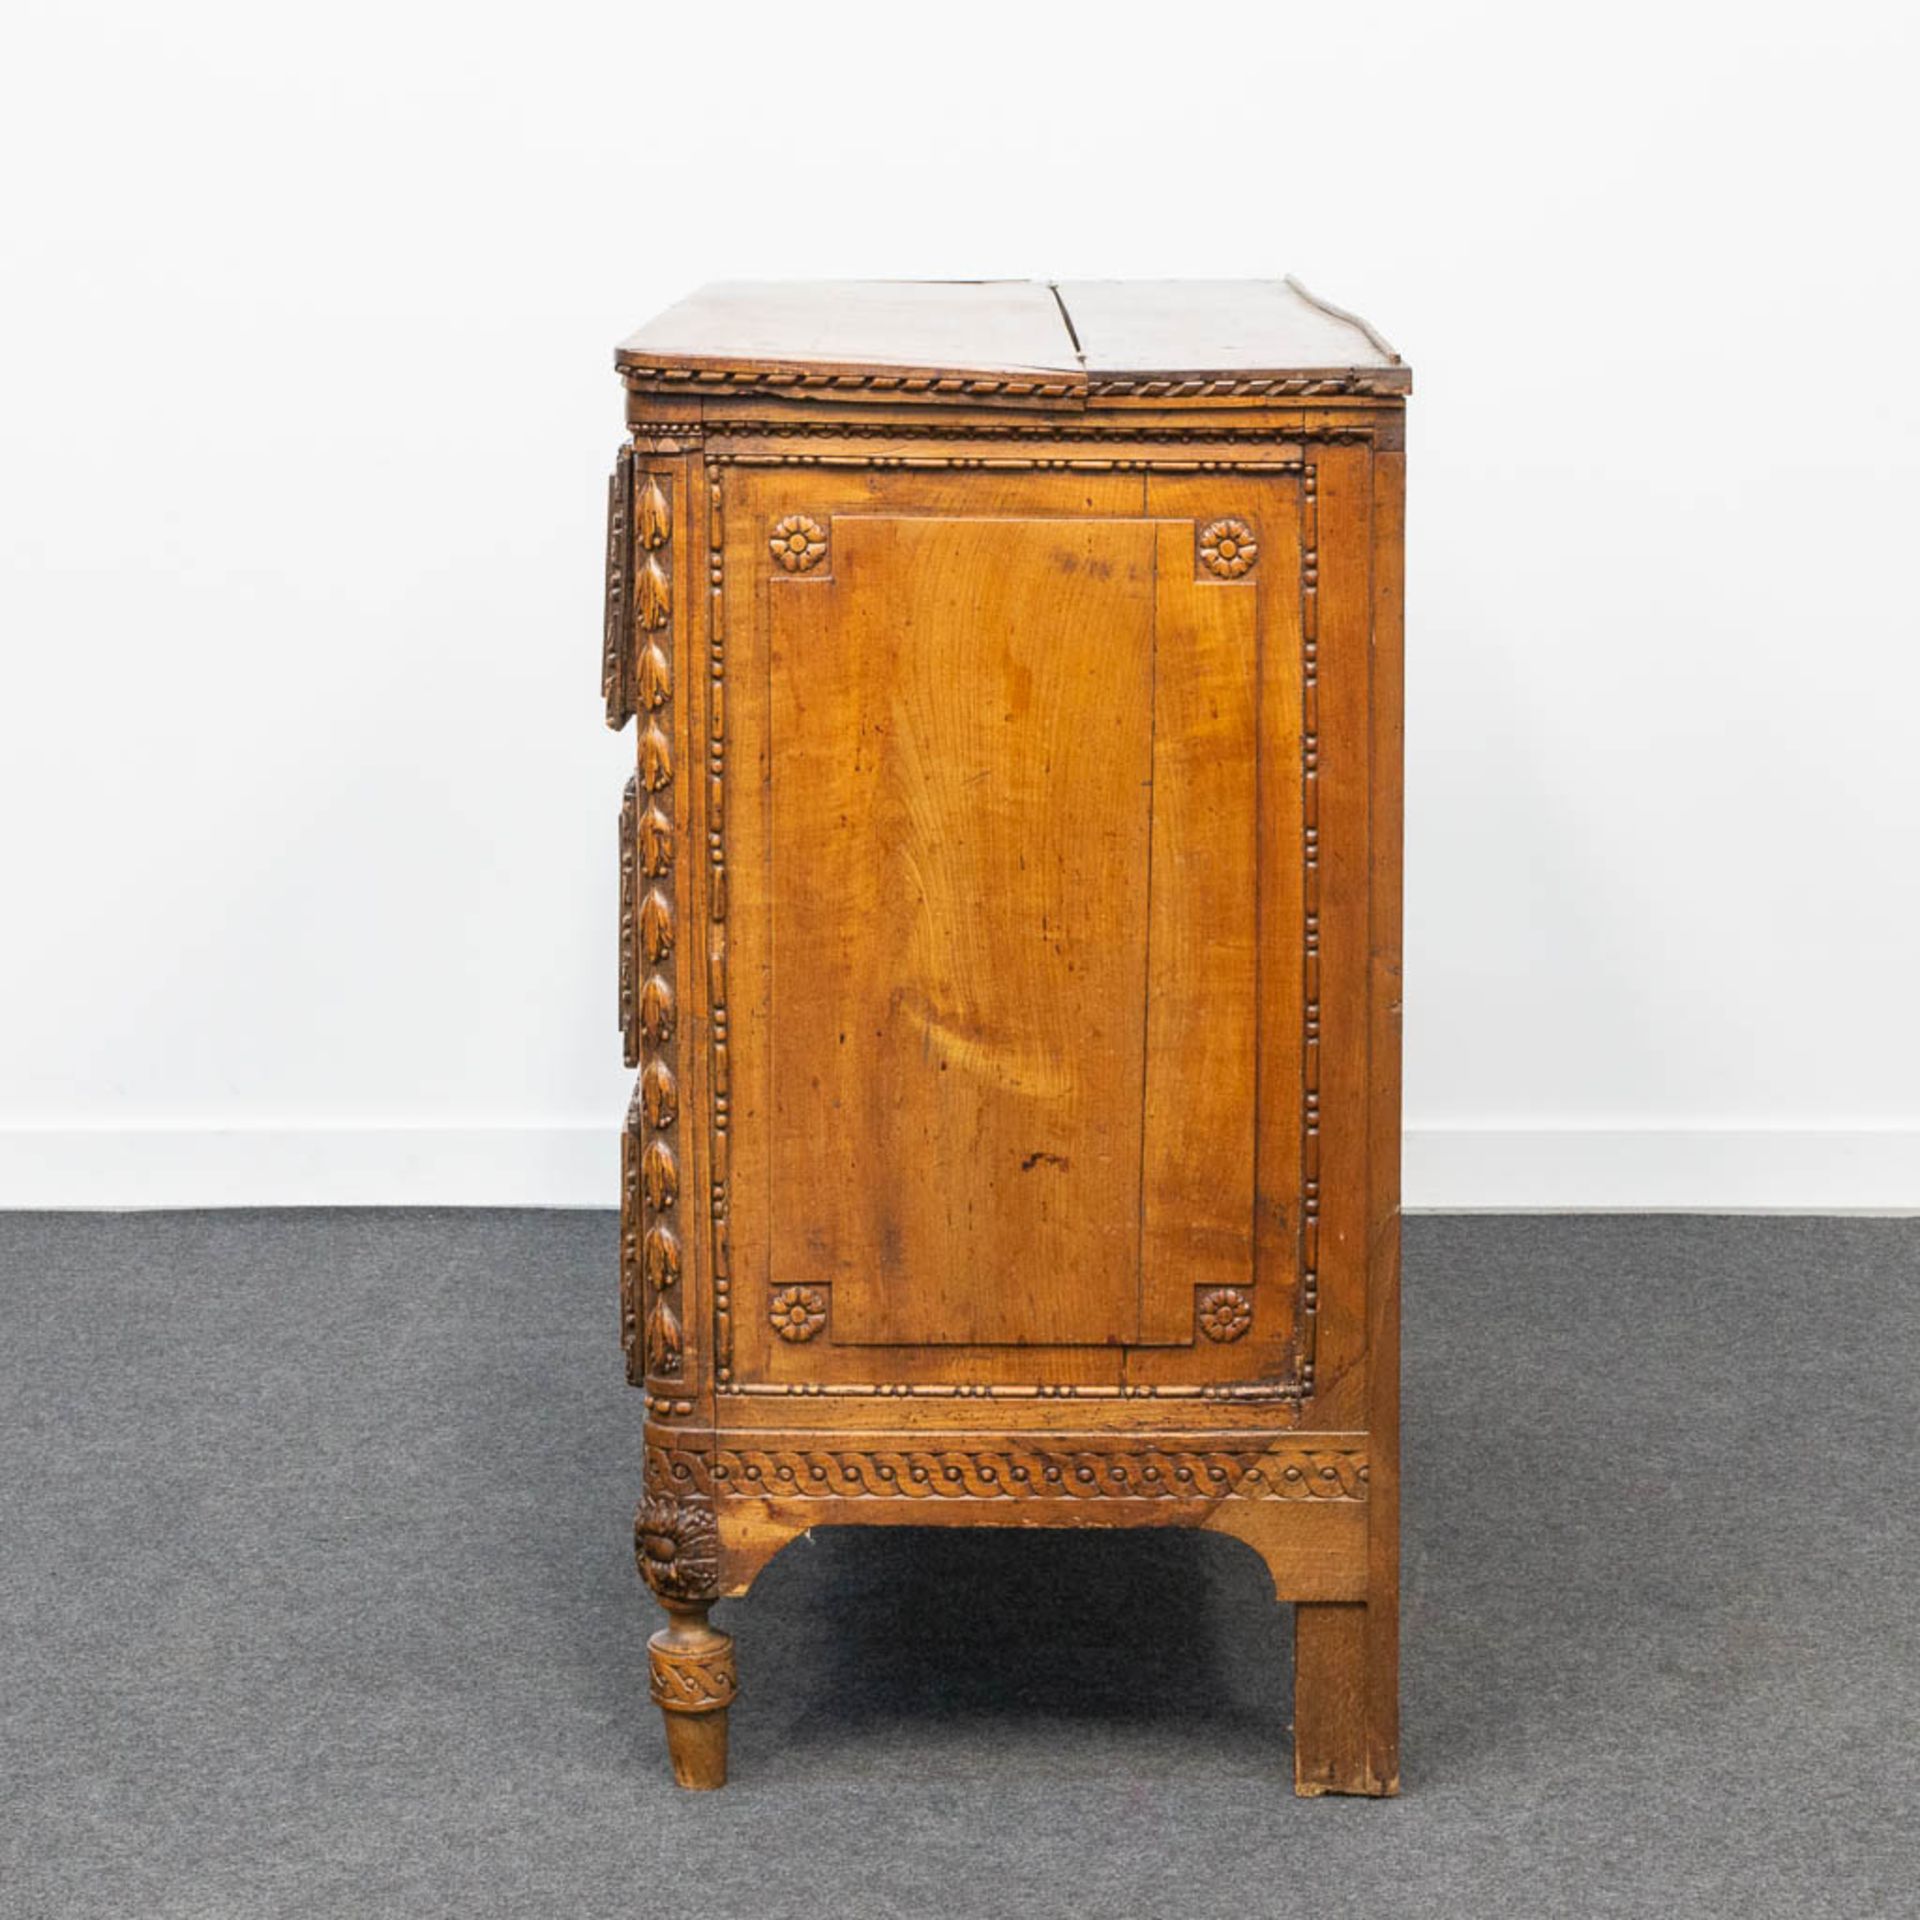 A wood sculptured commode in Louis XVI style, with 3 drawers and a hidden desk. 18th century. - Bild 6 aus 23